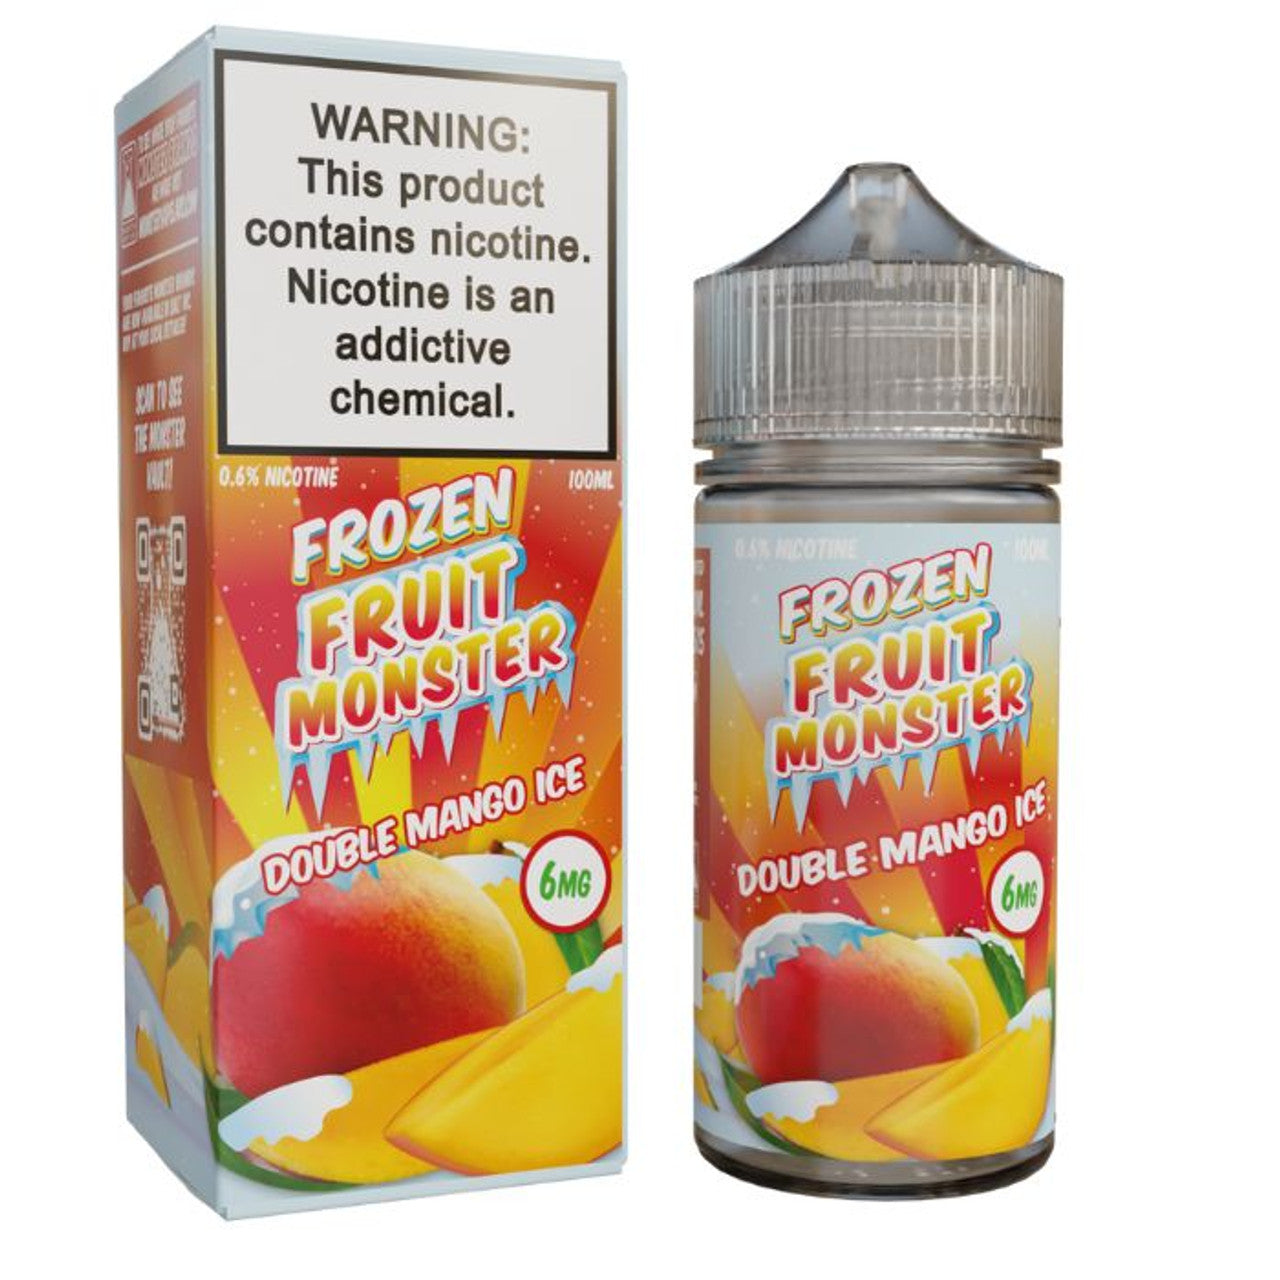 Double Mango Ice by Jam Monster 100mL 6mg with Packaging